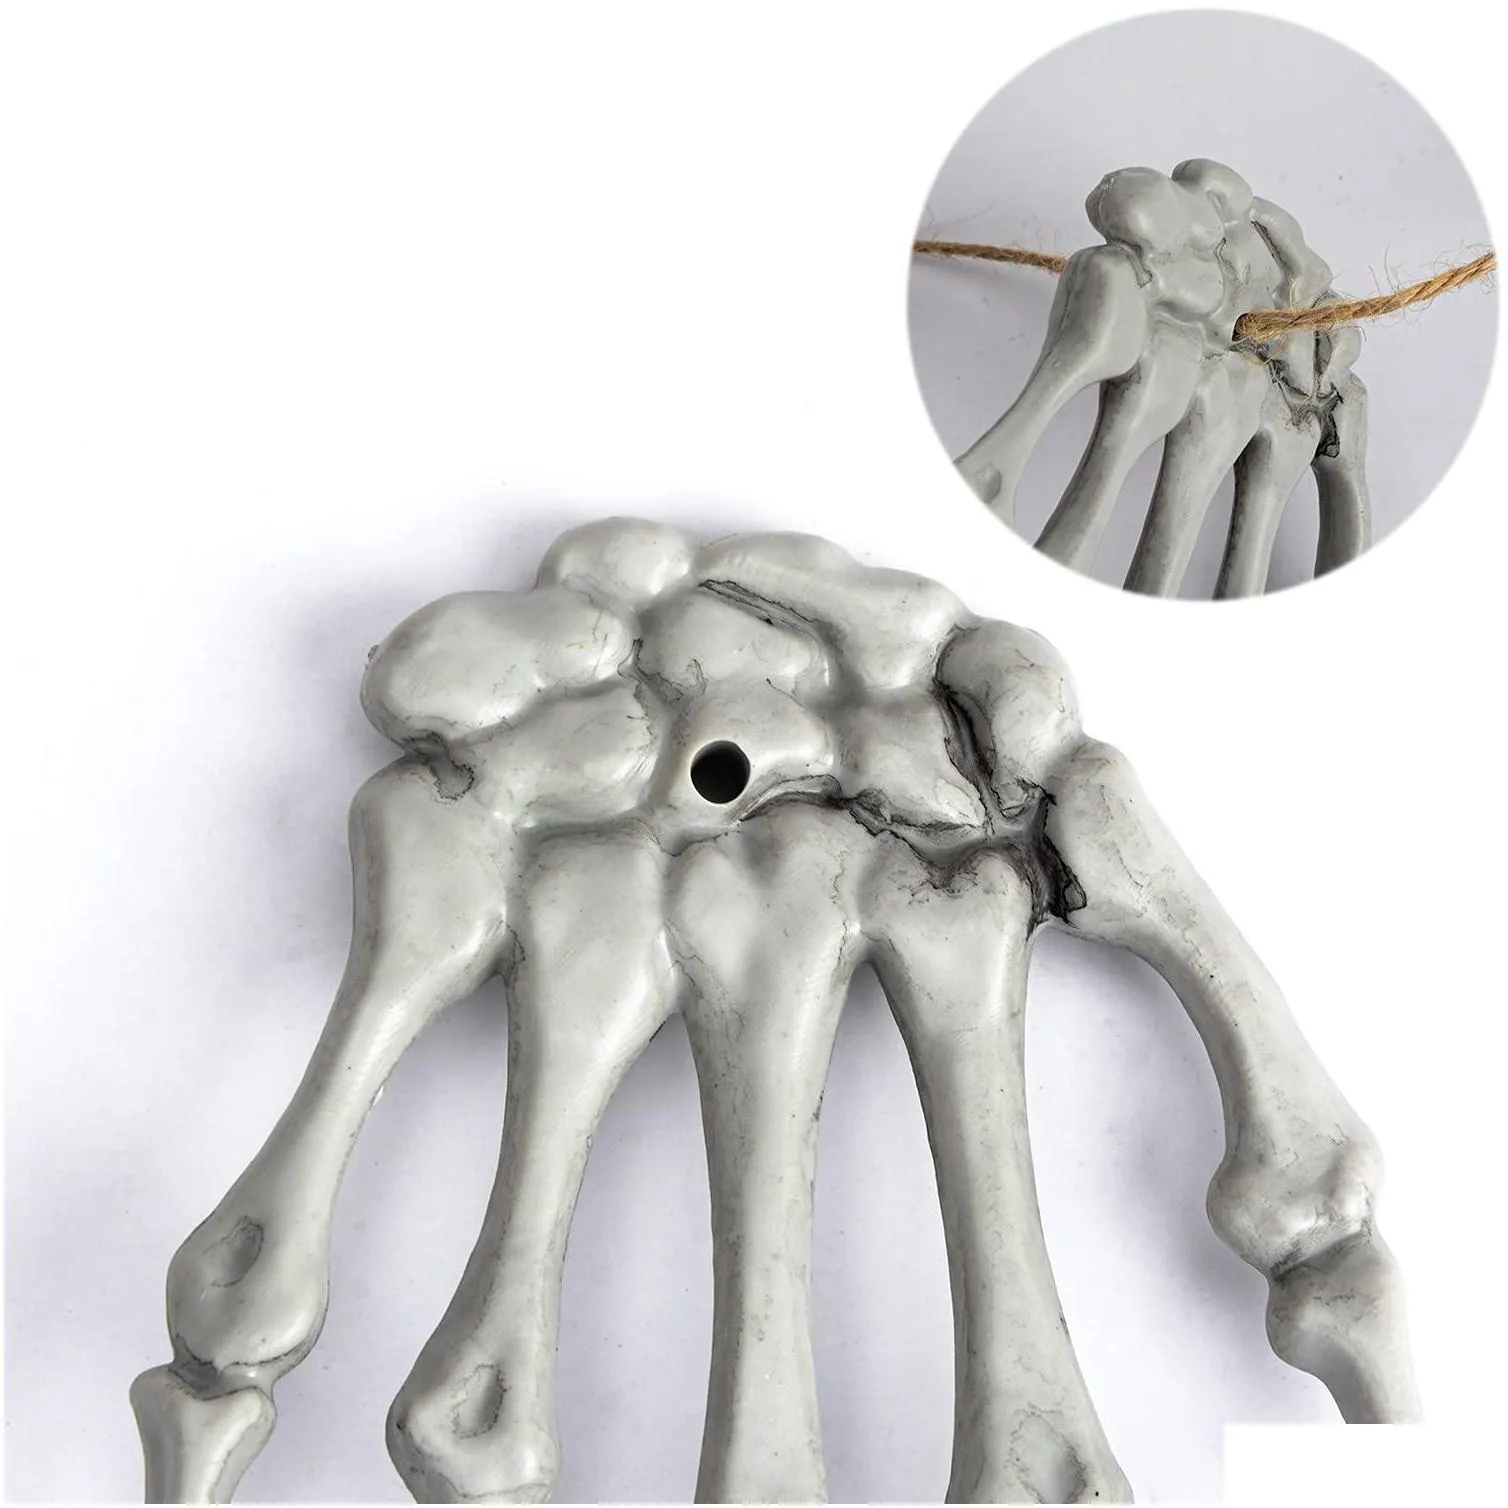 party decoration halloween skeleton hands realistic plastic fake human hand for zombie terror scary props amrfd